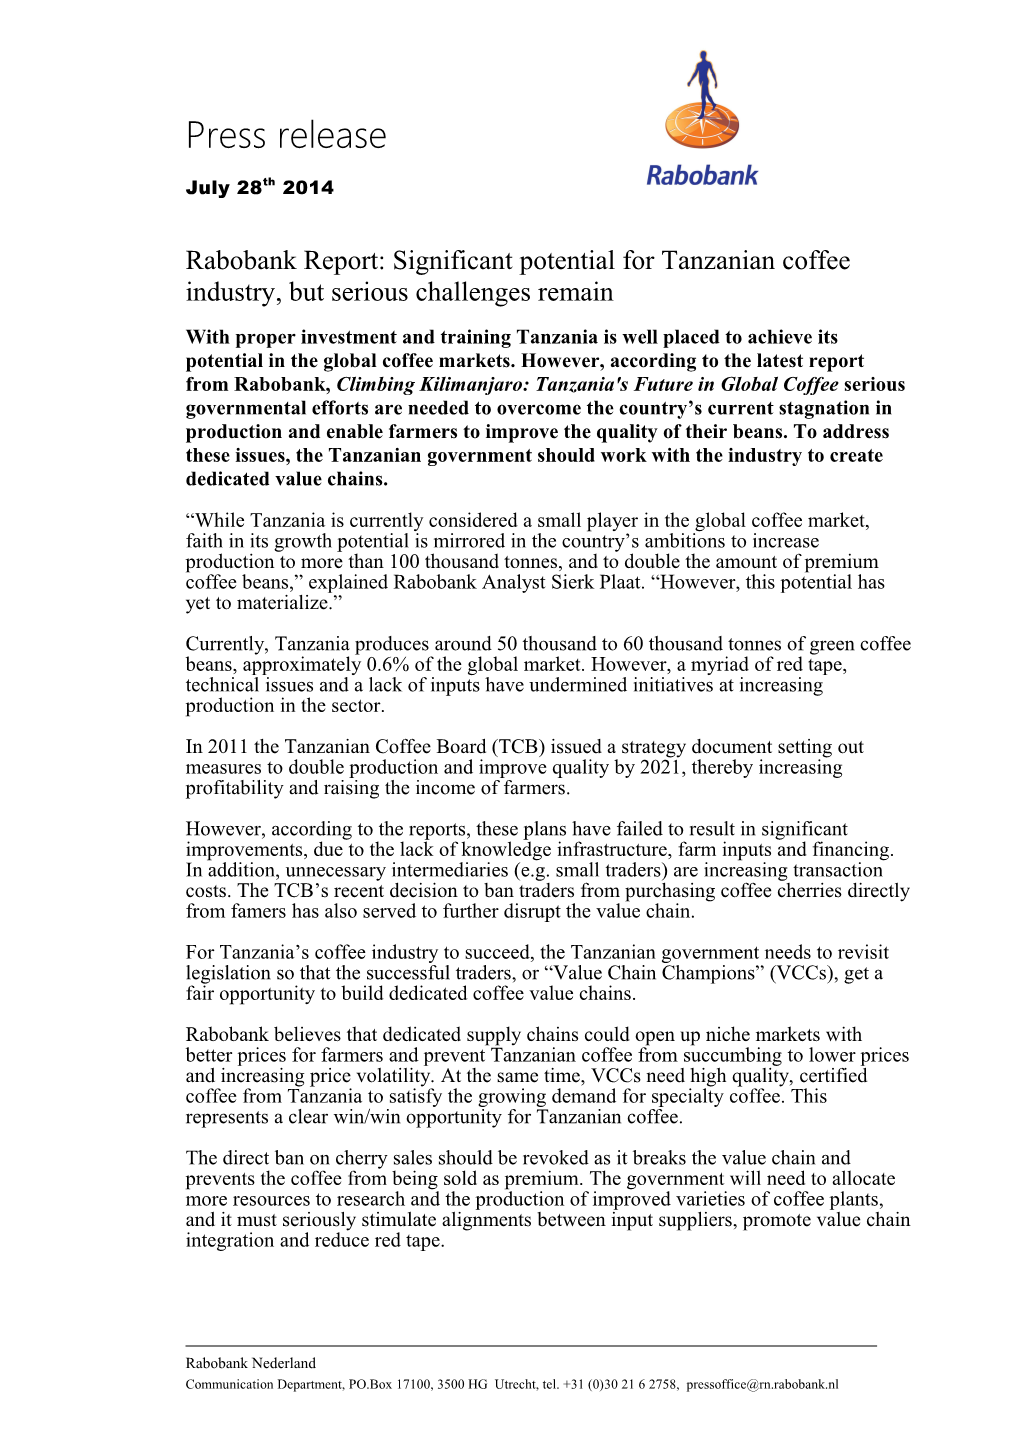 Rabobank Report: Significant Potential for Tanzanian Coffee Industry, but Serious Challenges